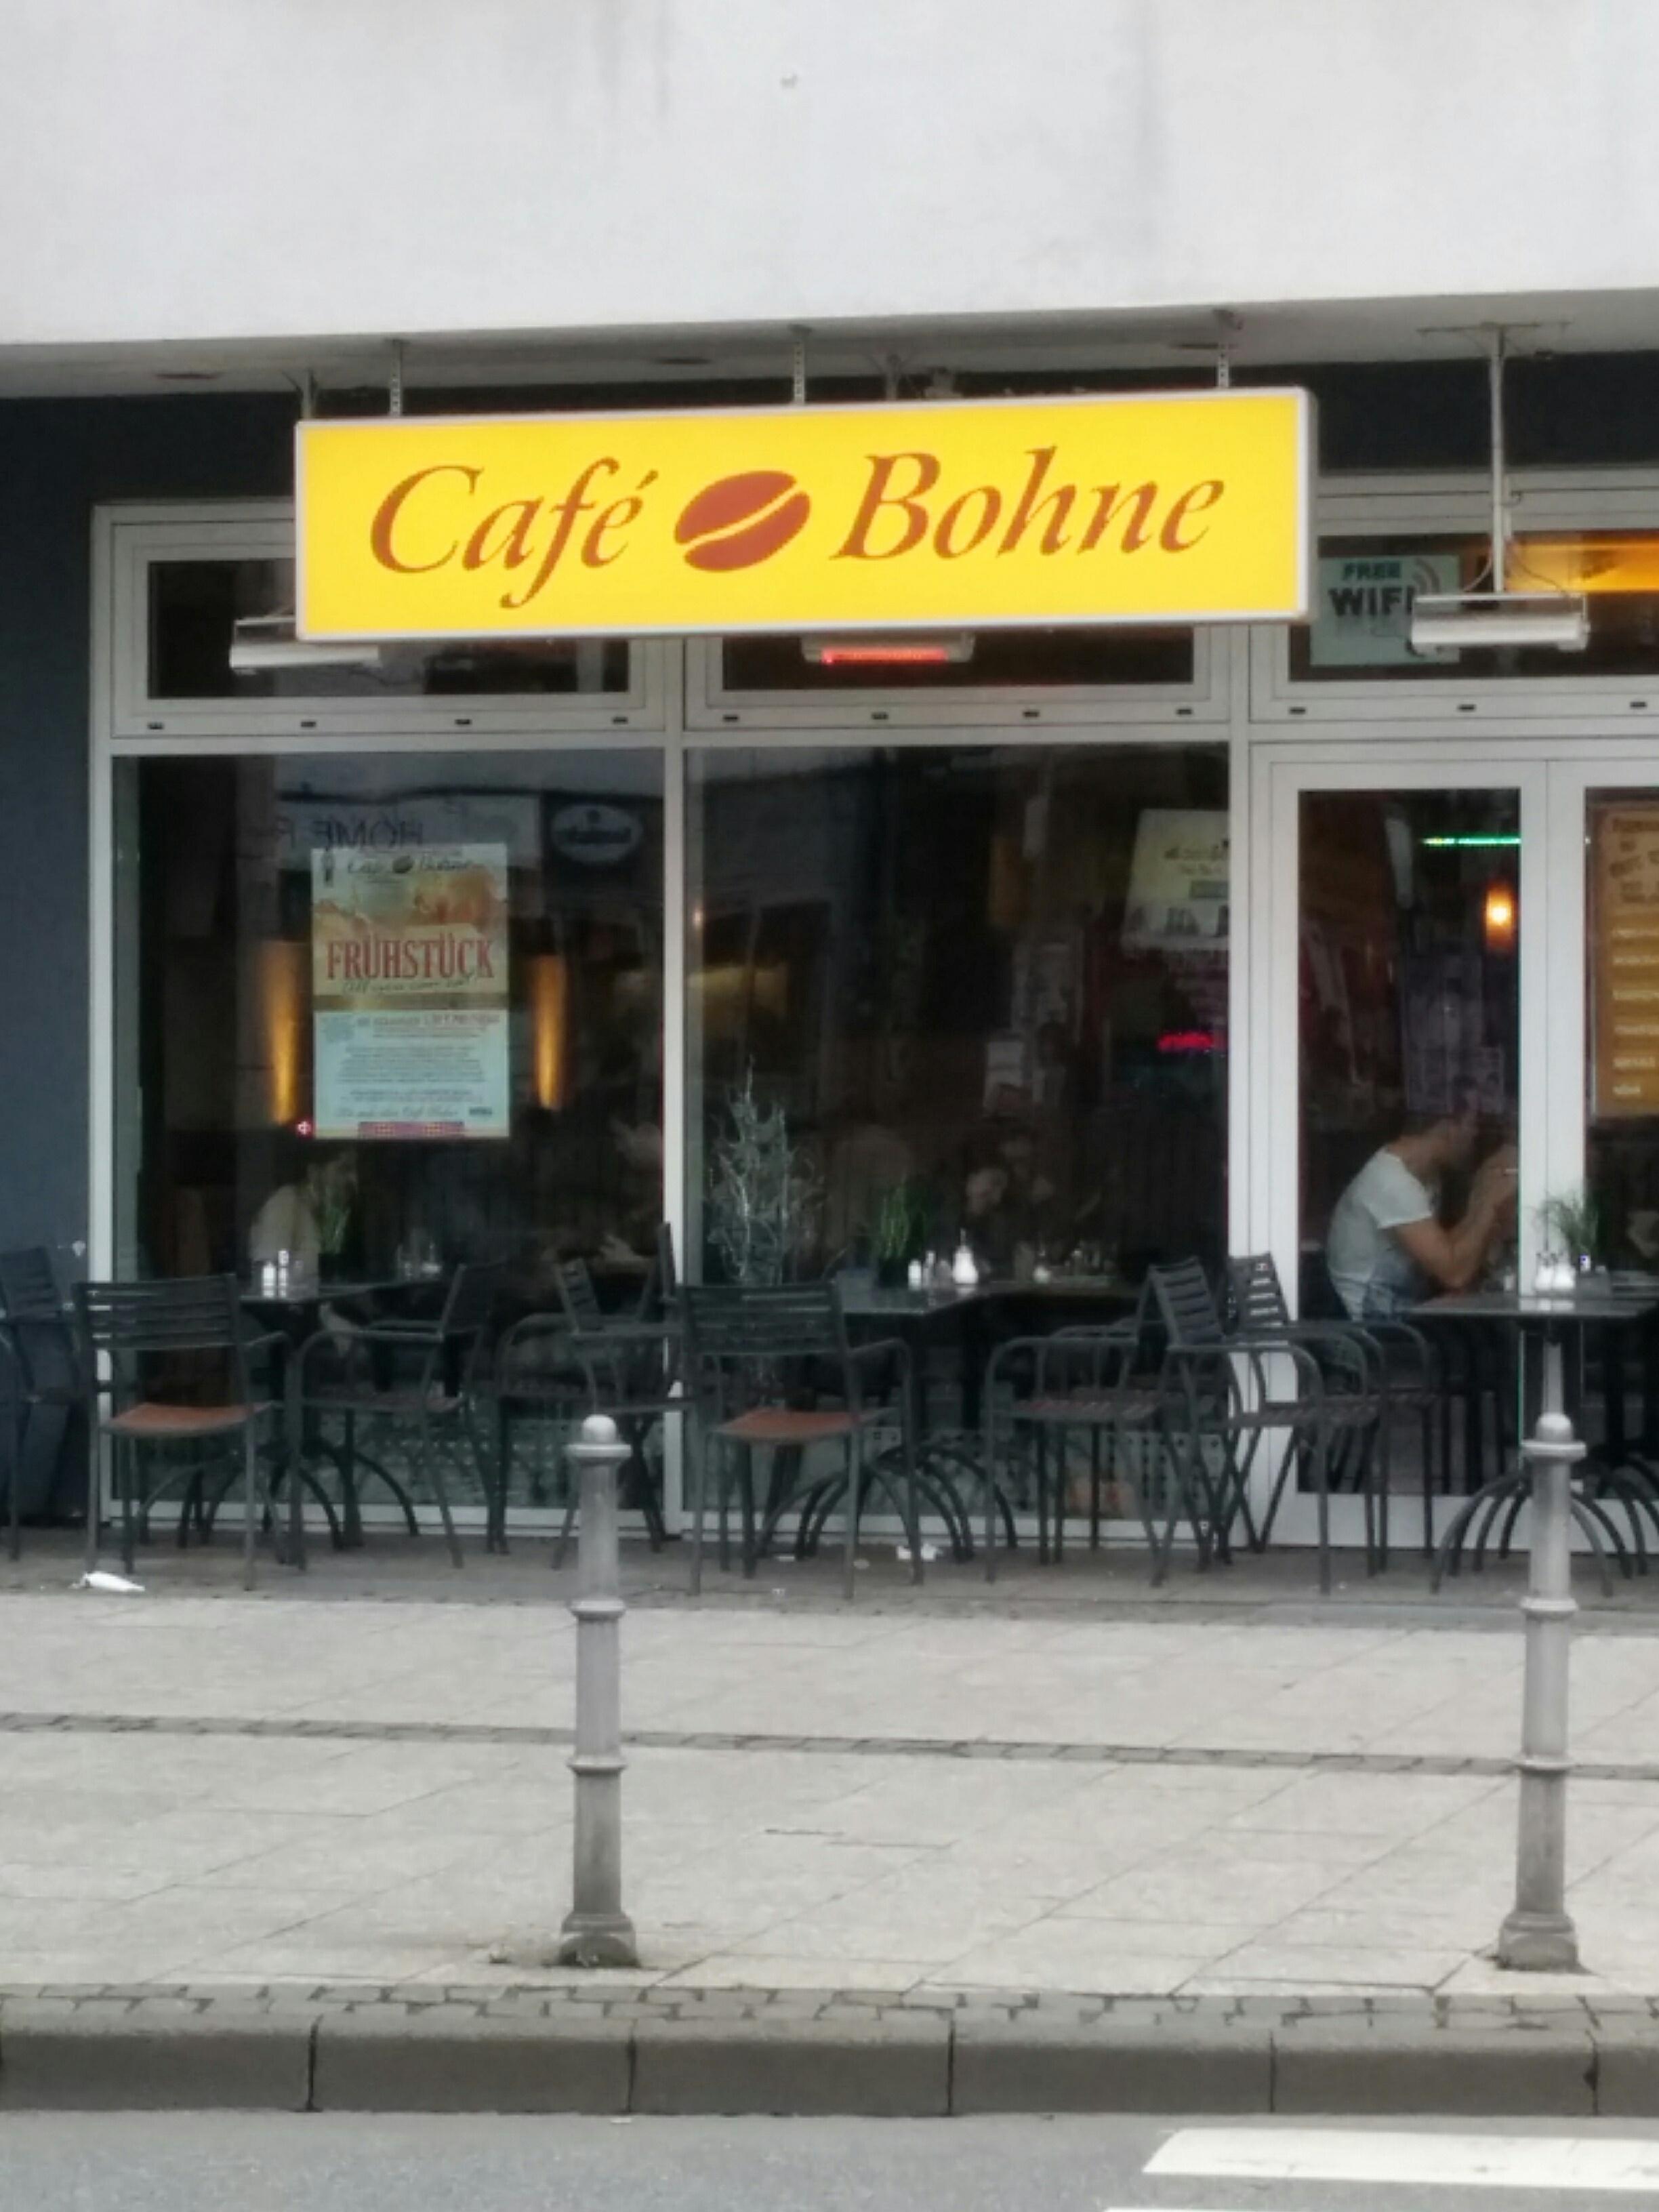 Cover image of this place Cafe Bohne II